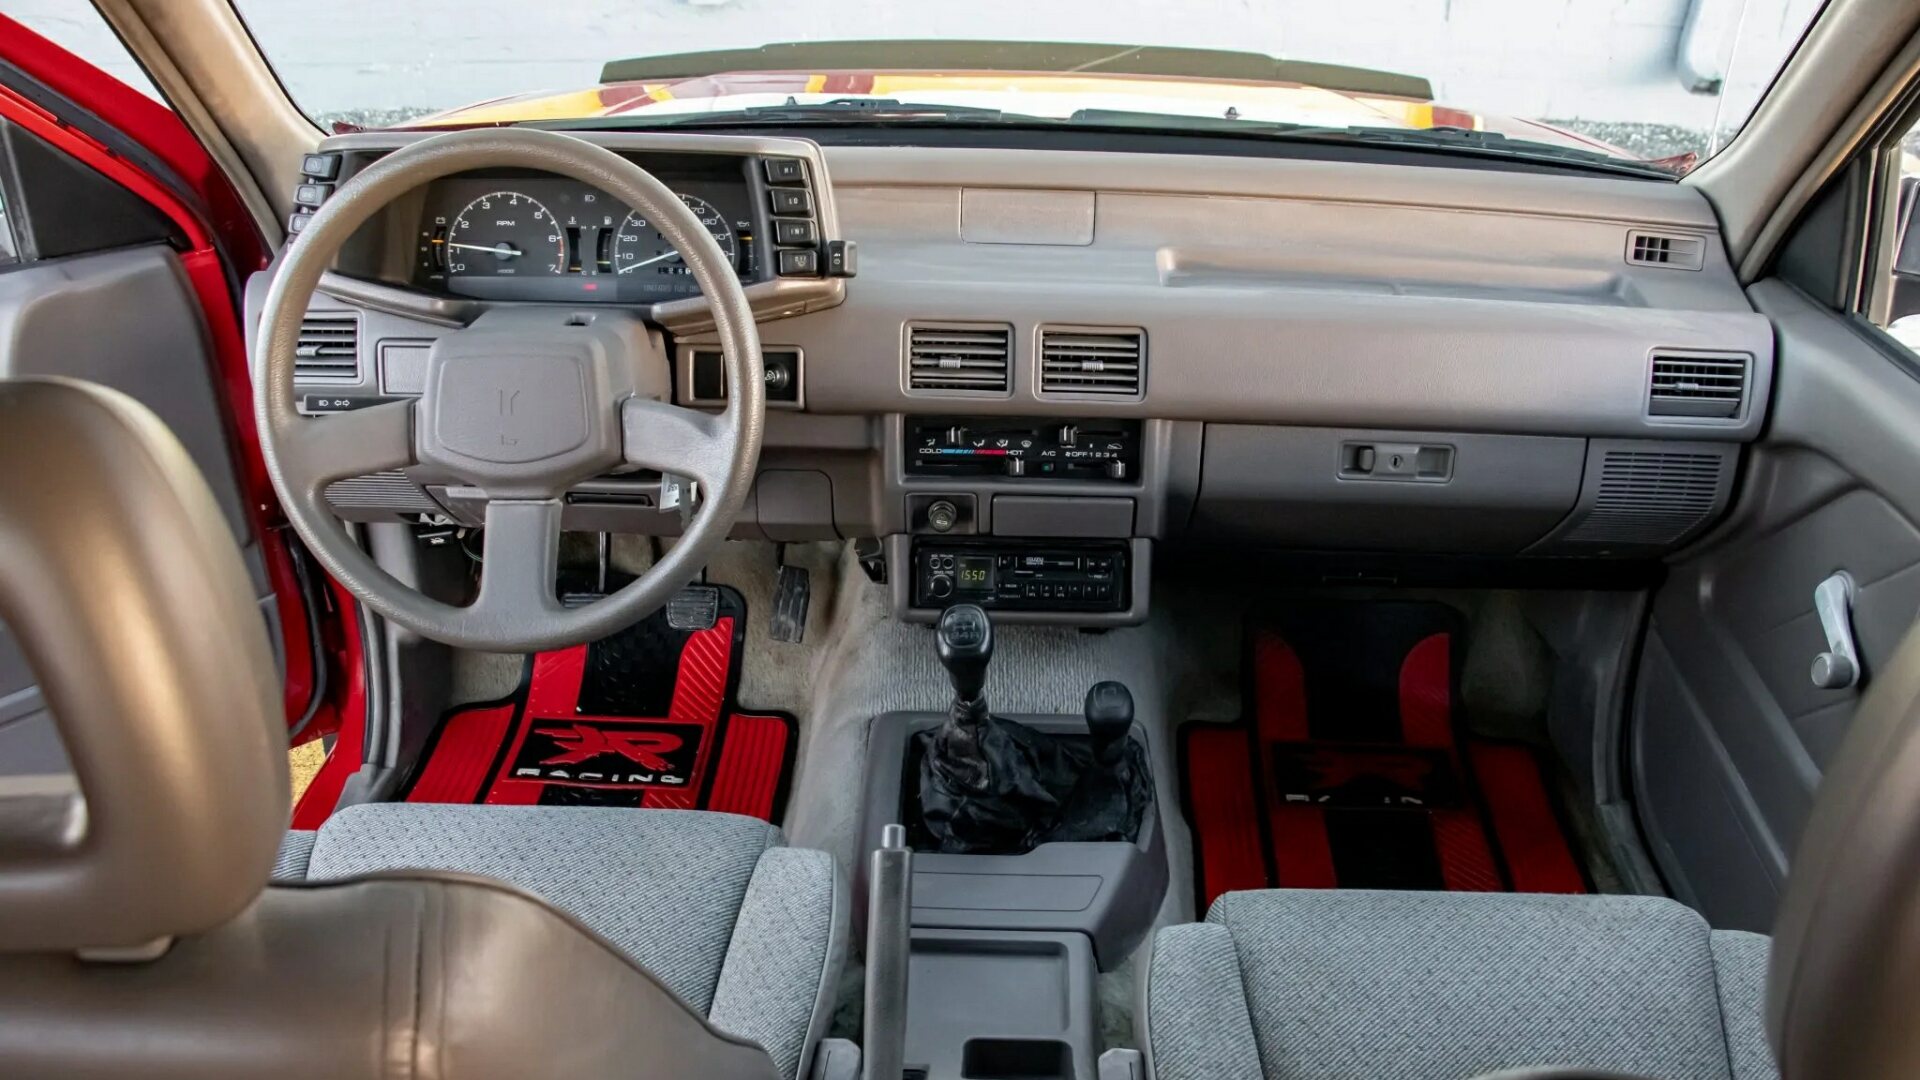 The Interior, Steering, And Dashboard Of The 1994 Isuzu Amigo XS 4WD That Is On Auction